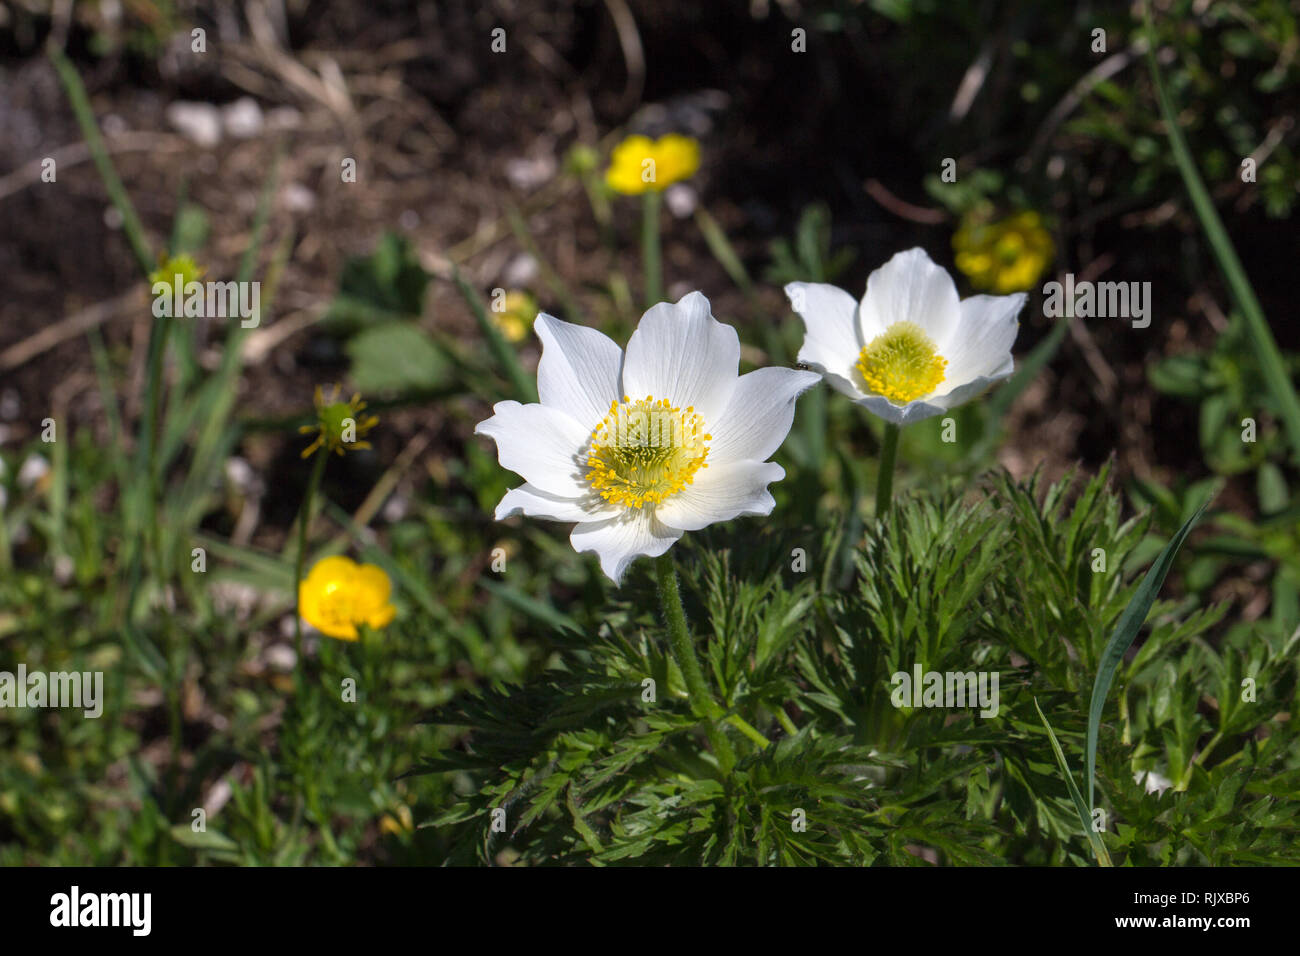 White wood anemone flowers, as a first sign of spring in the forest. Stock Photo